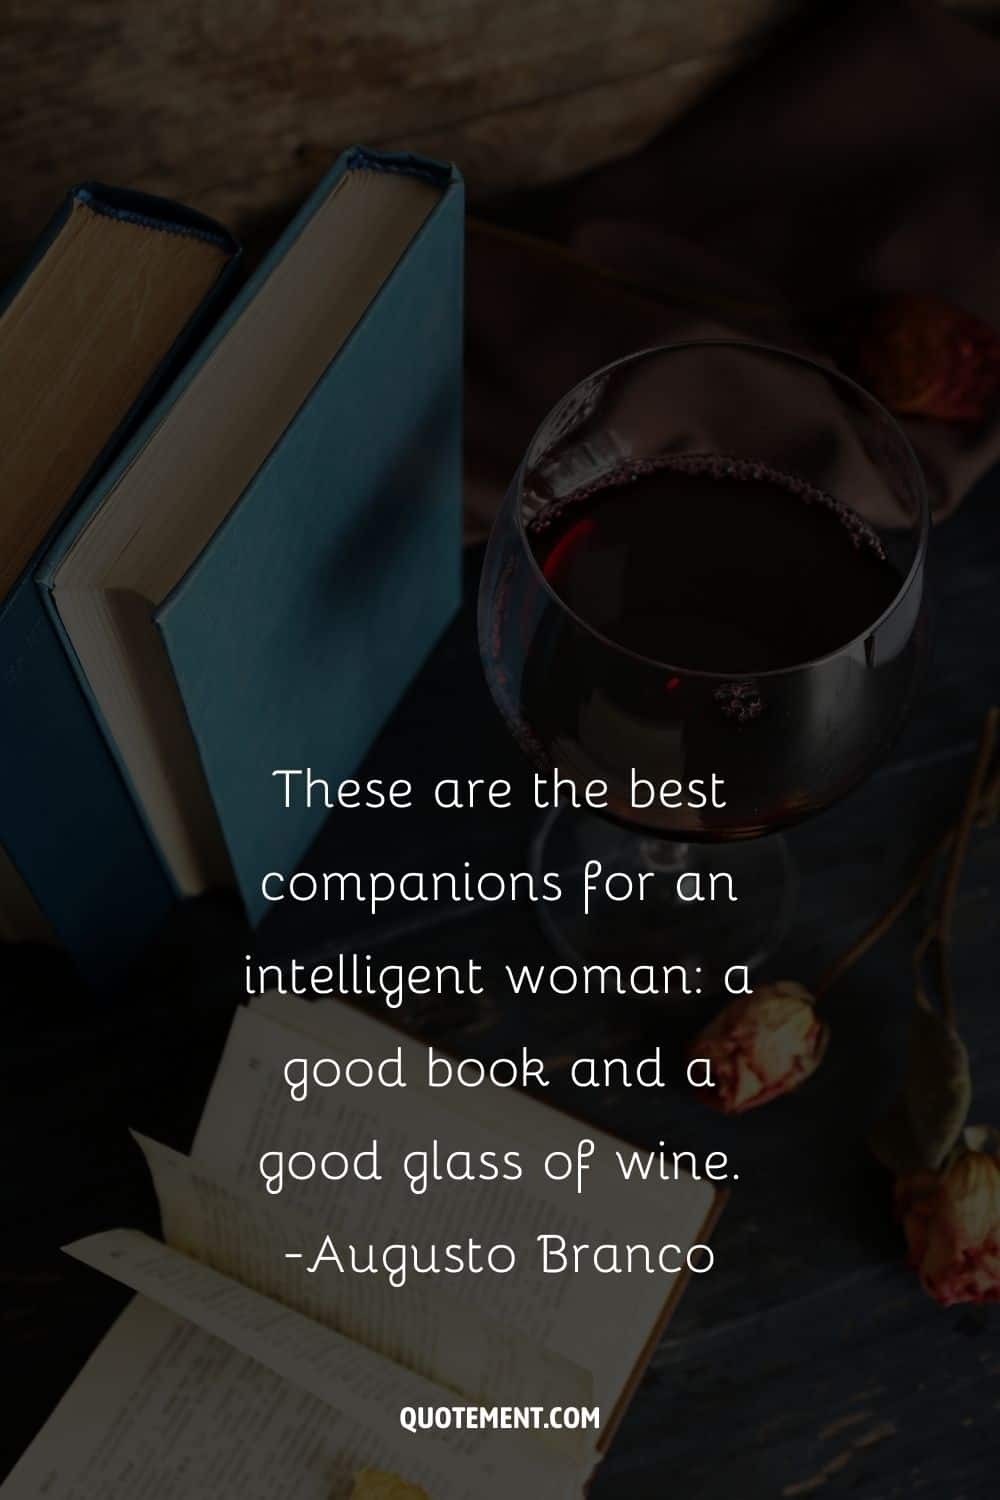 These are the best companions for an intelligent woman a good book and a good glass of wine